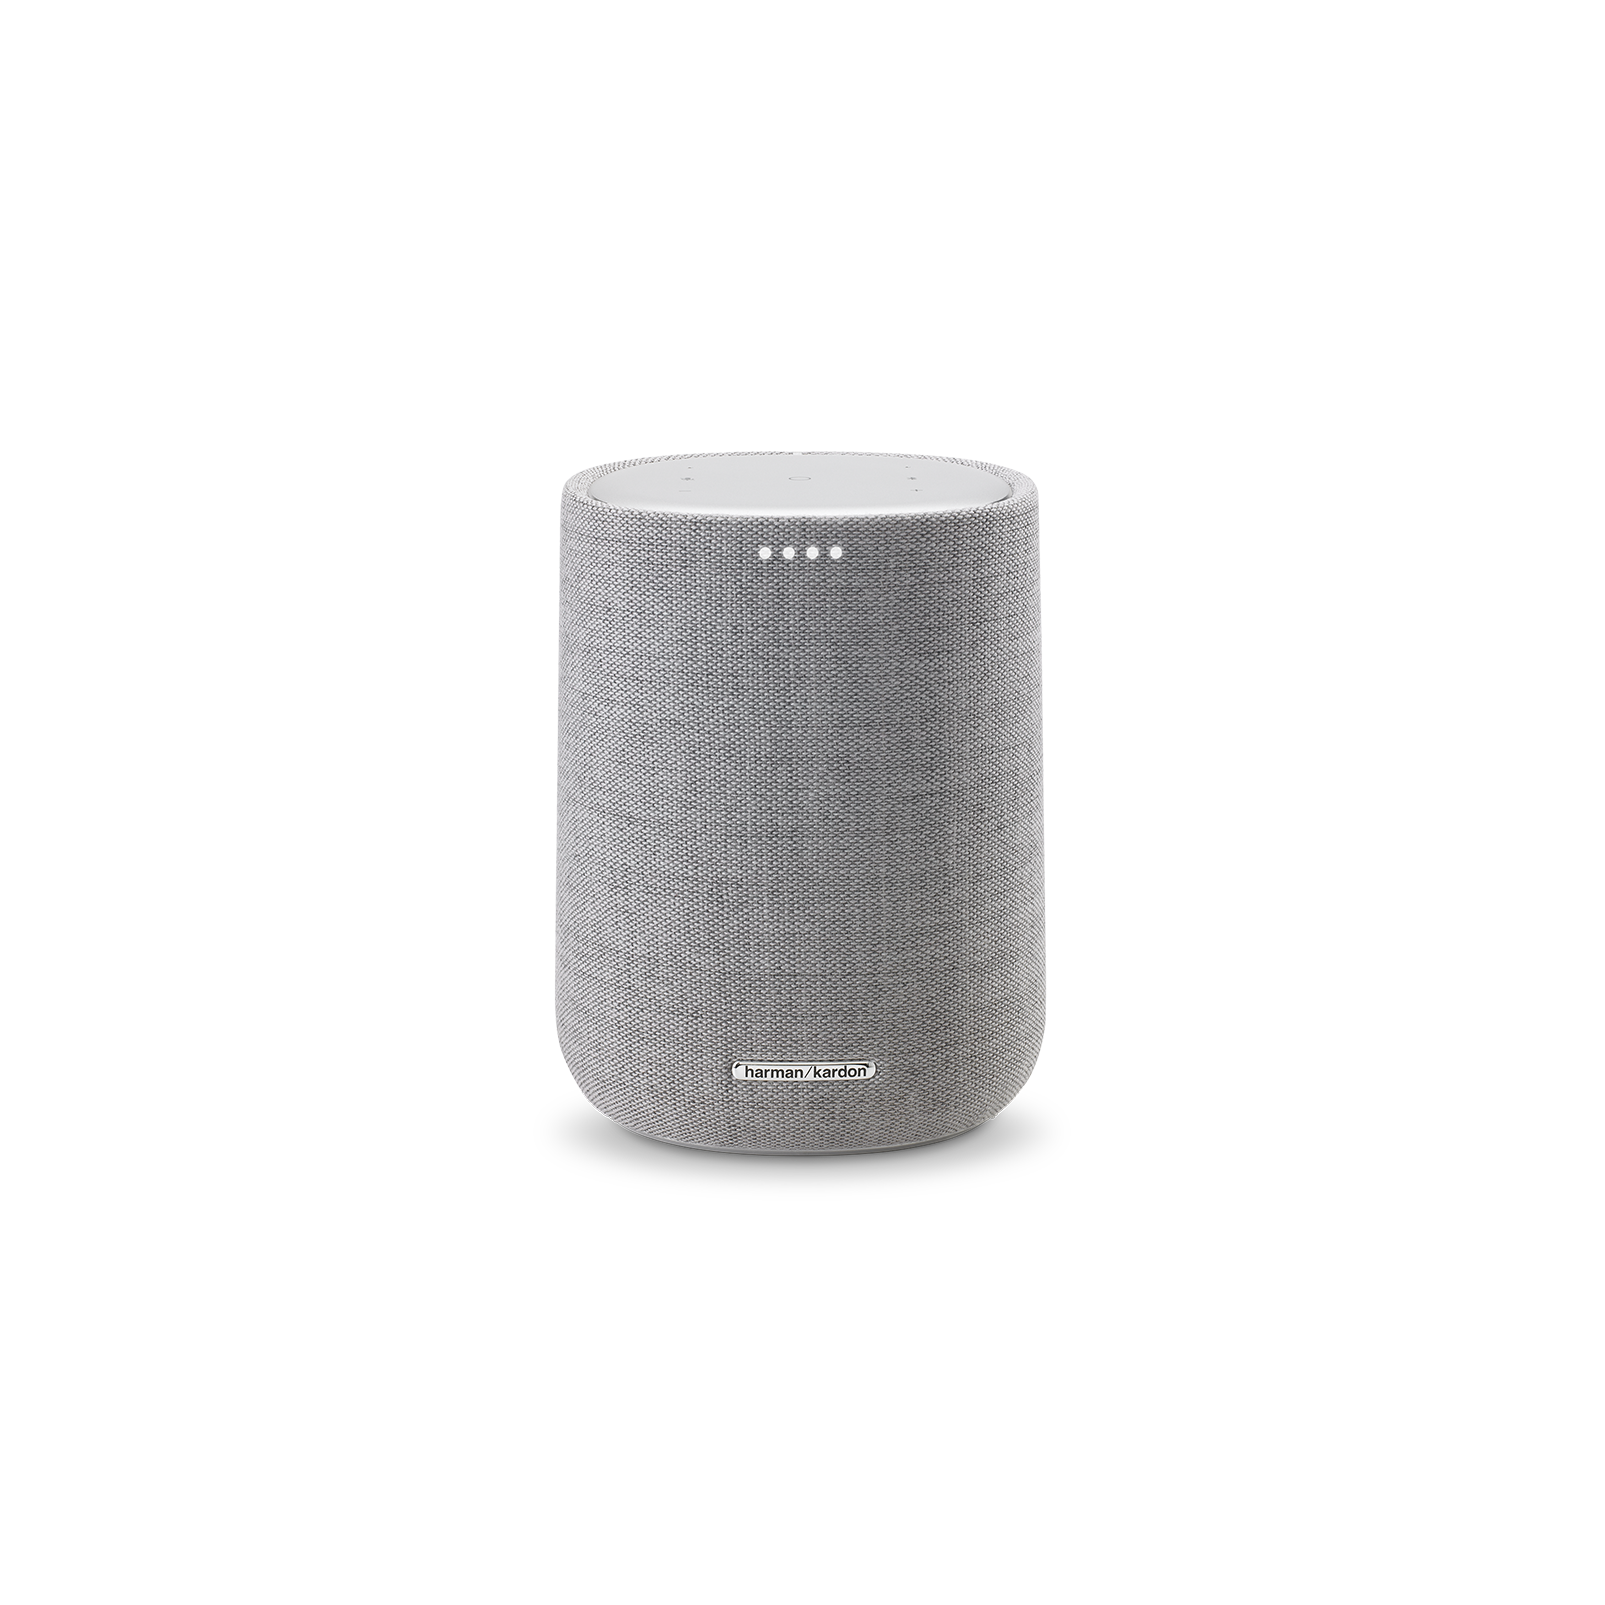 Harman Kardon Citation One MKIII - Grey - All-in-one smart speaker with room-filling sound - Front